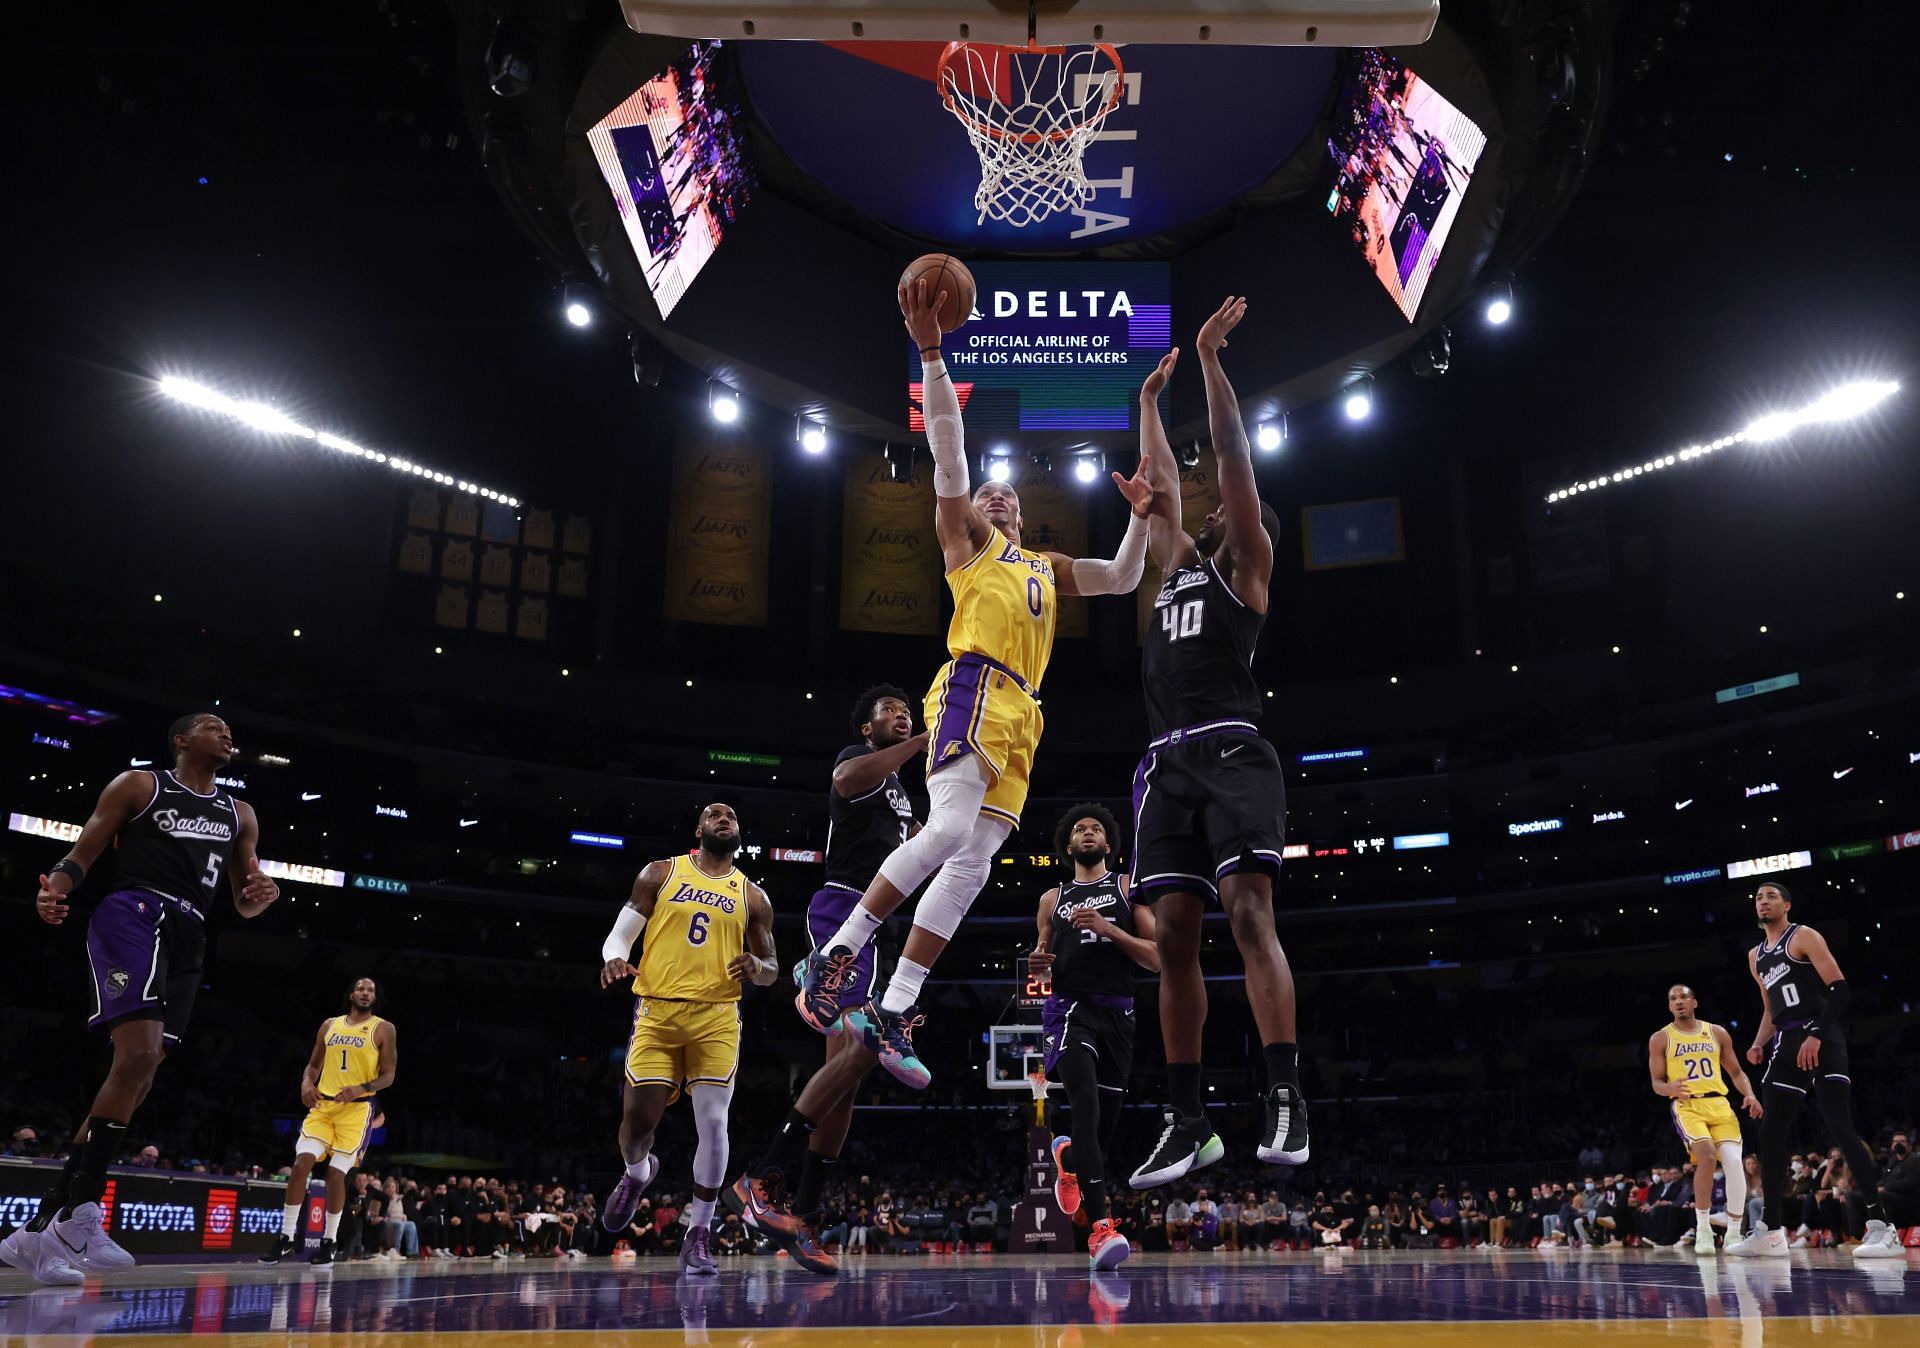 LA Lakers guard Russell Westbrook scores a layup over Harrison Barnes of the Sacramento Kings.